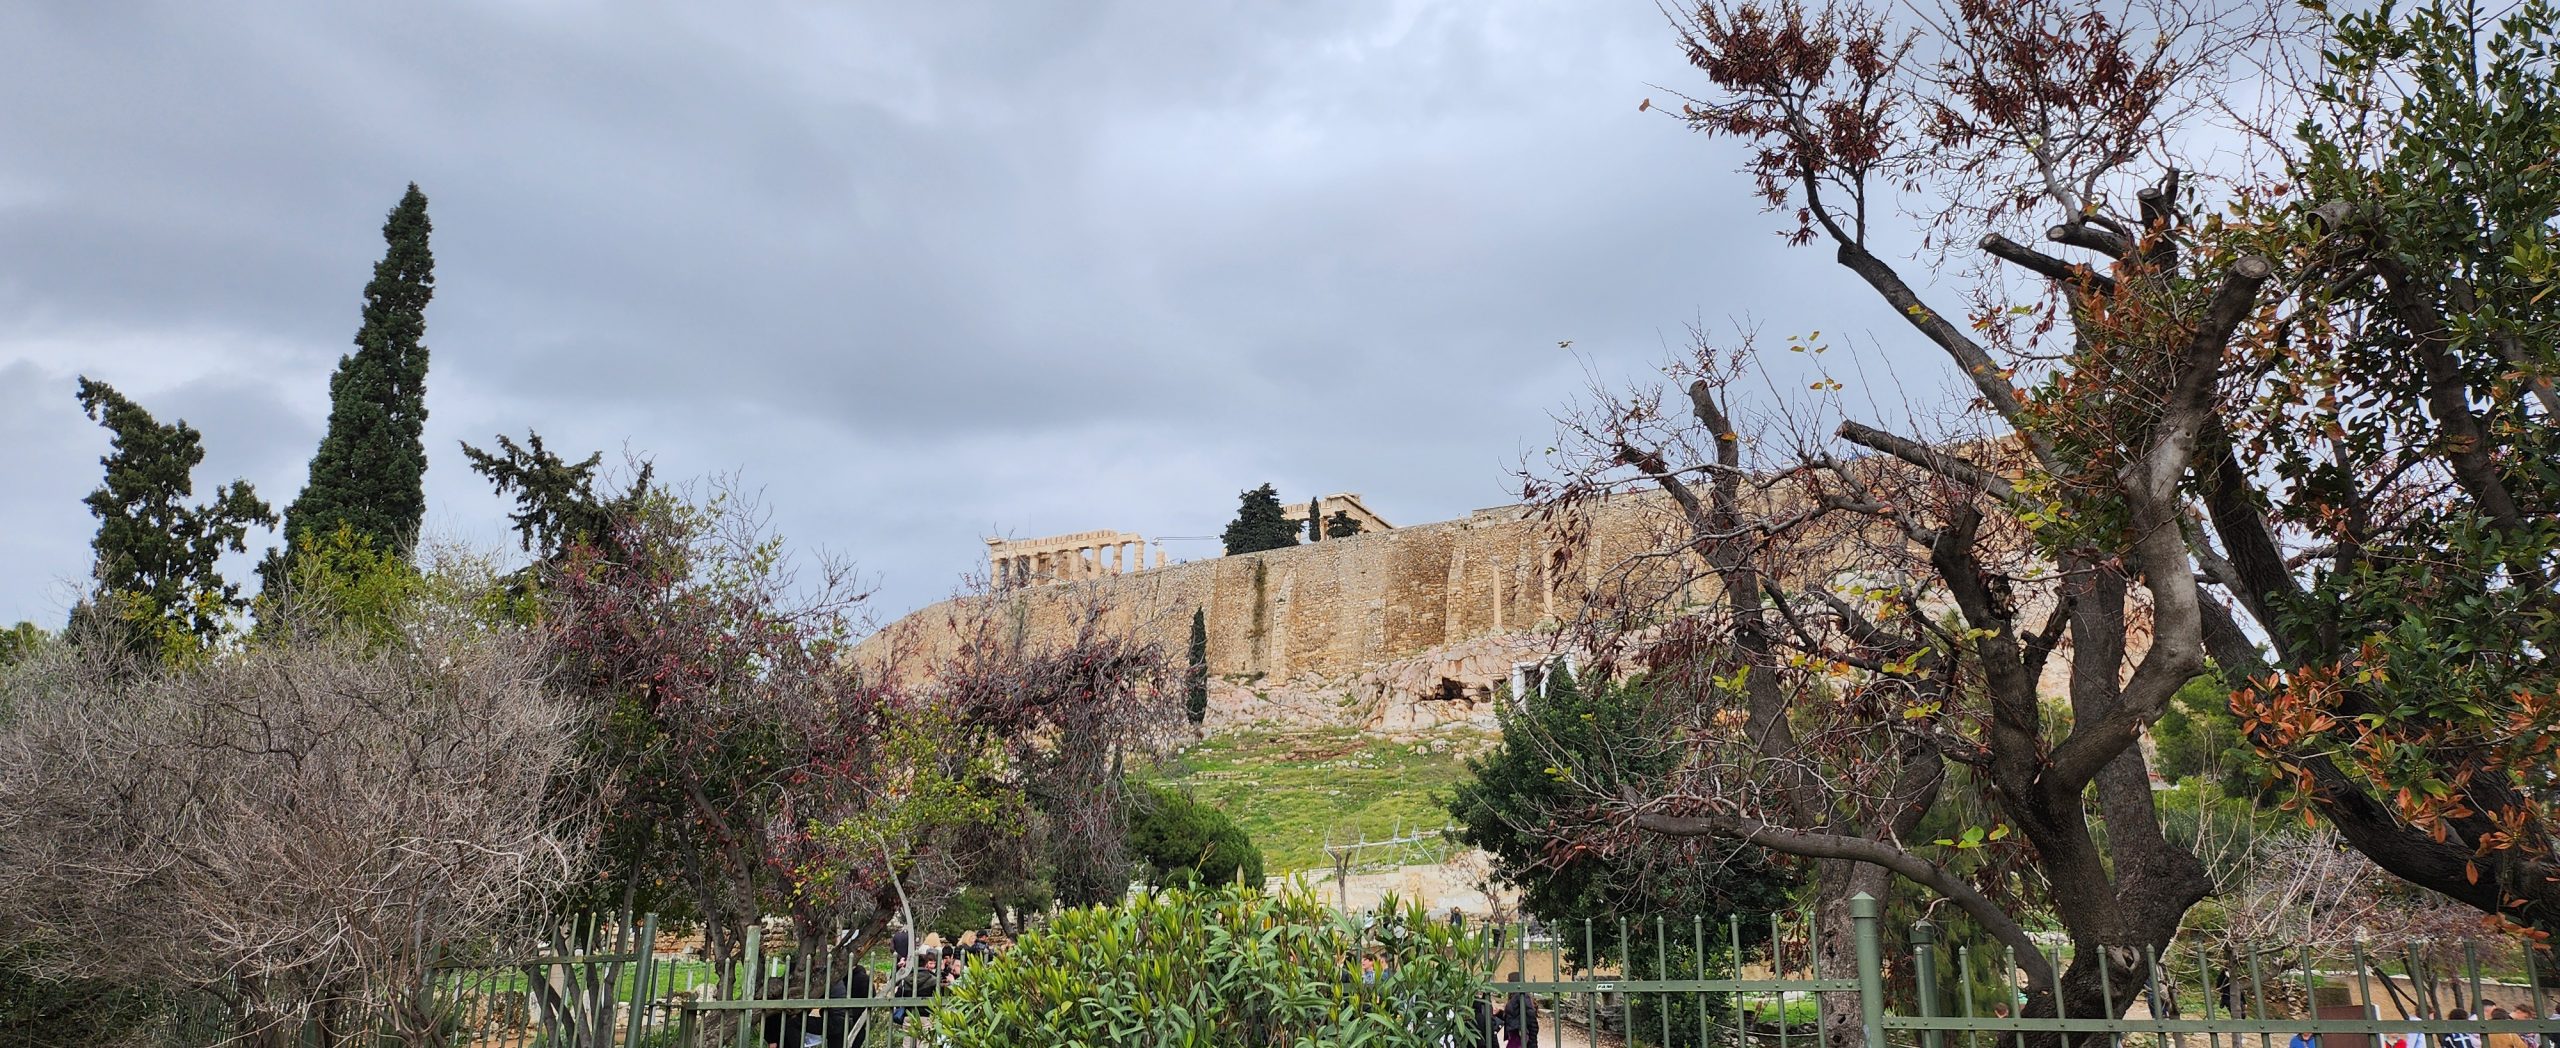 Ground view of the Acropolis in Athens Greece